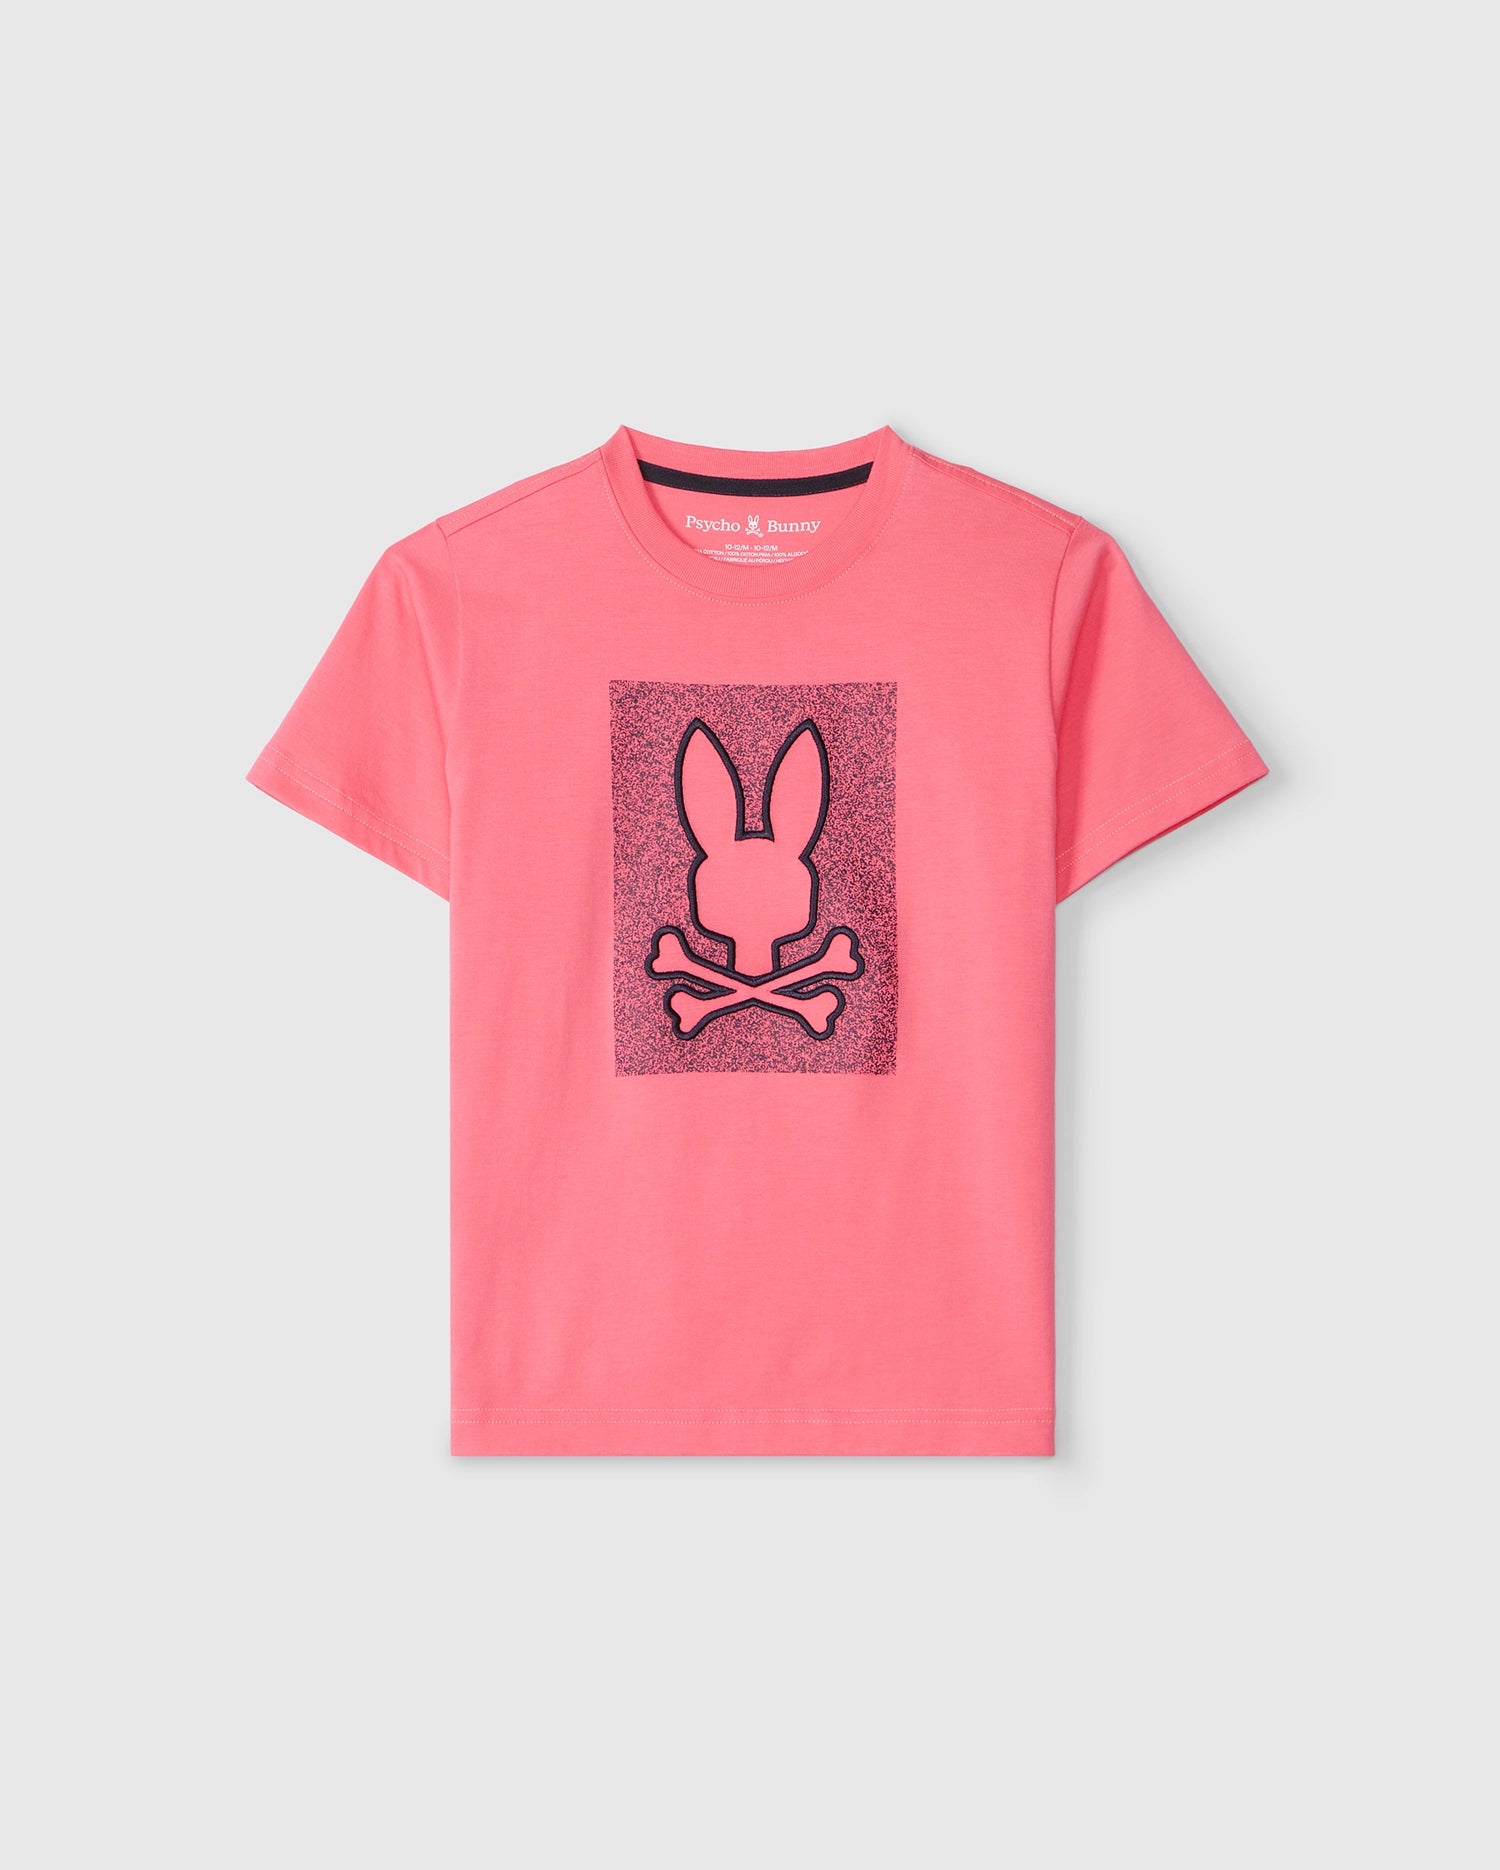 The KIDS LIVINGSTON GRAPHIC TEE - B0U247B2TS, crafted from luxurious Peruvian Pima cotton, showcases a pink T-shirt with a striking black bunny design featuring a bunny head above crossed bones. The textured darker pink background adds depth to the graphic, all set against a light grey backdrop. This stylish item is brought to you by Psycho Bunny.